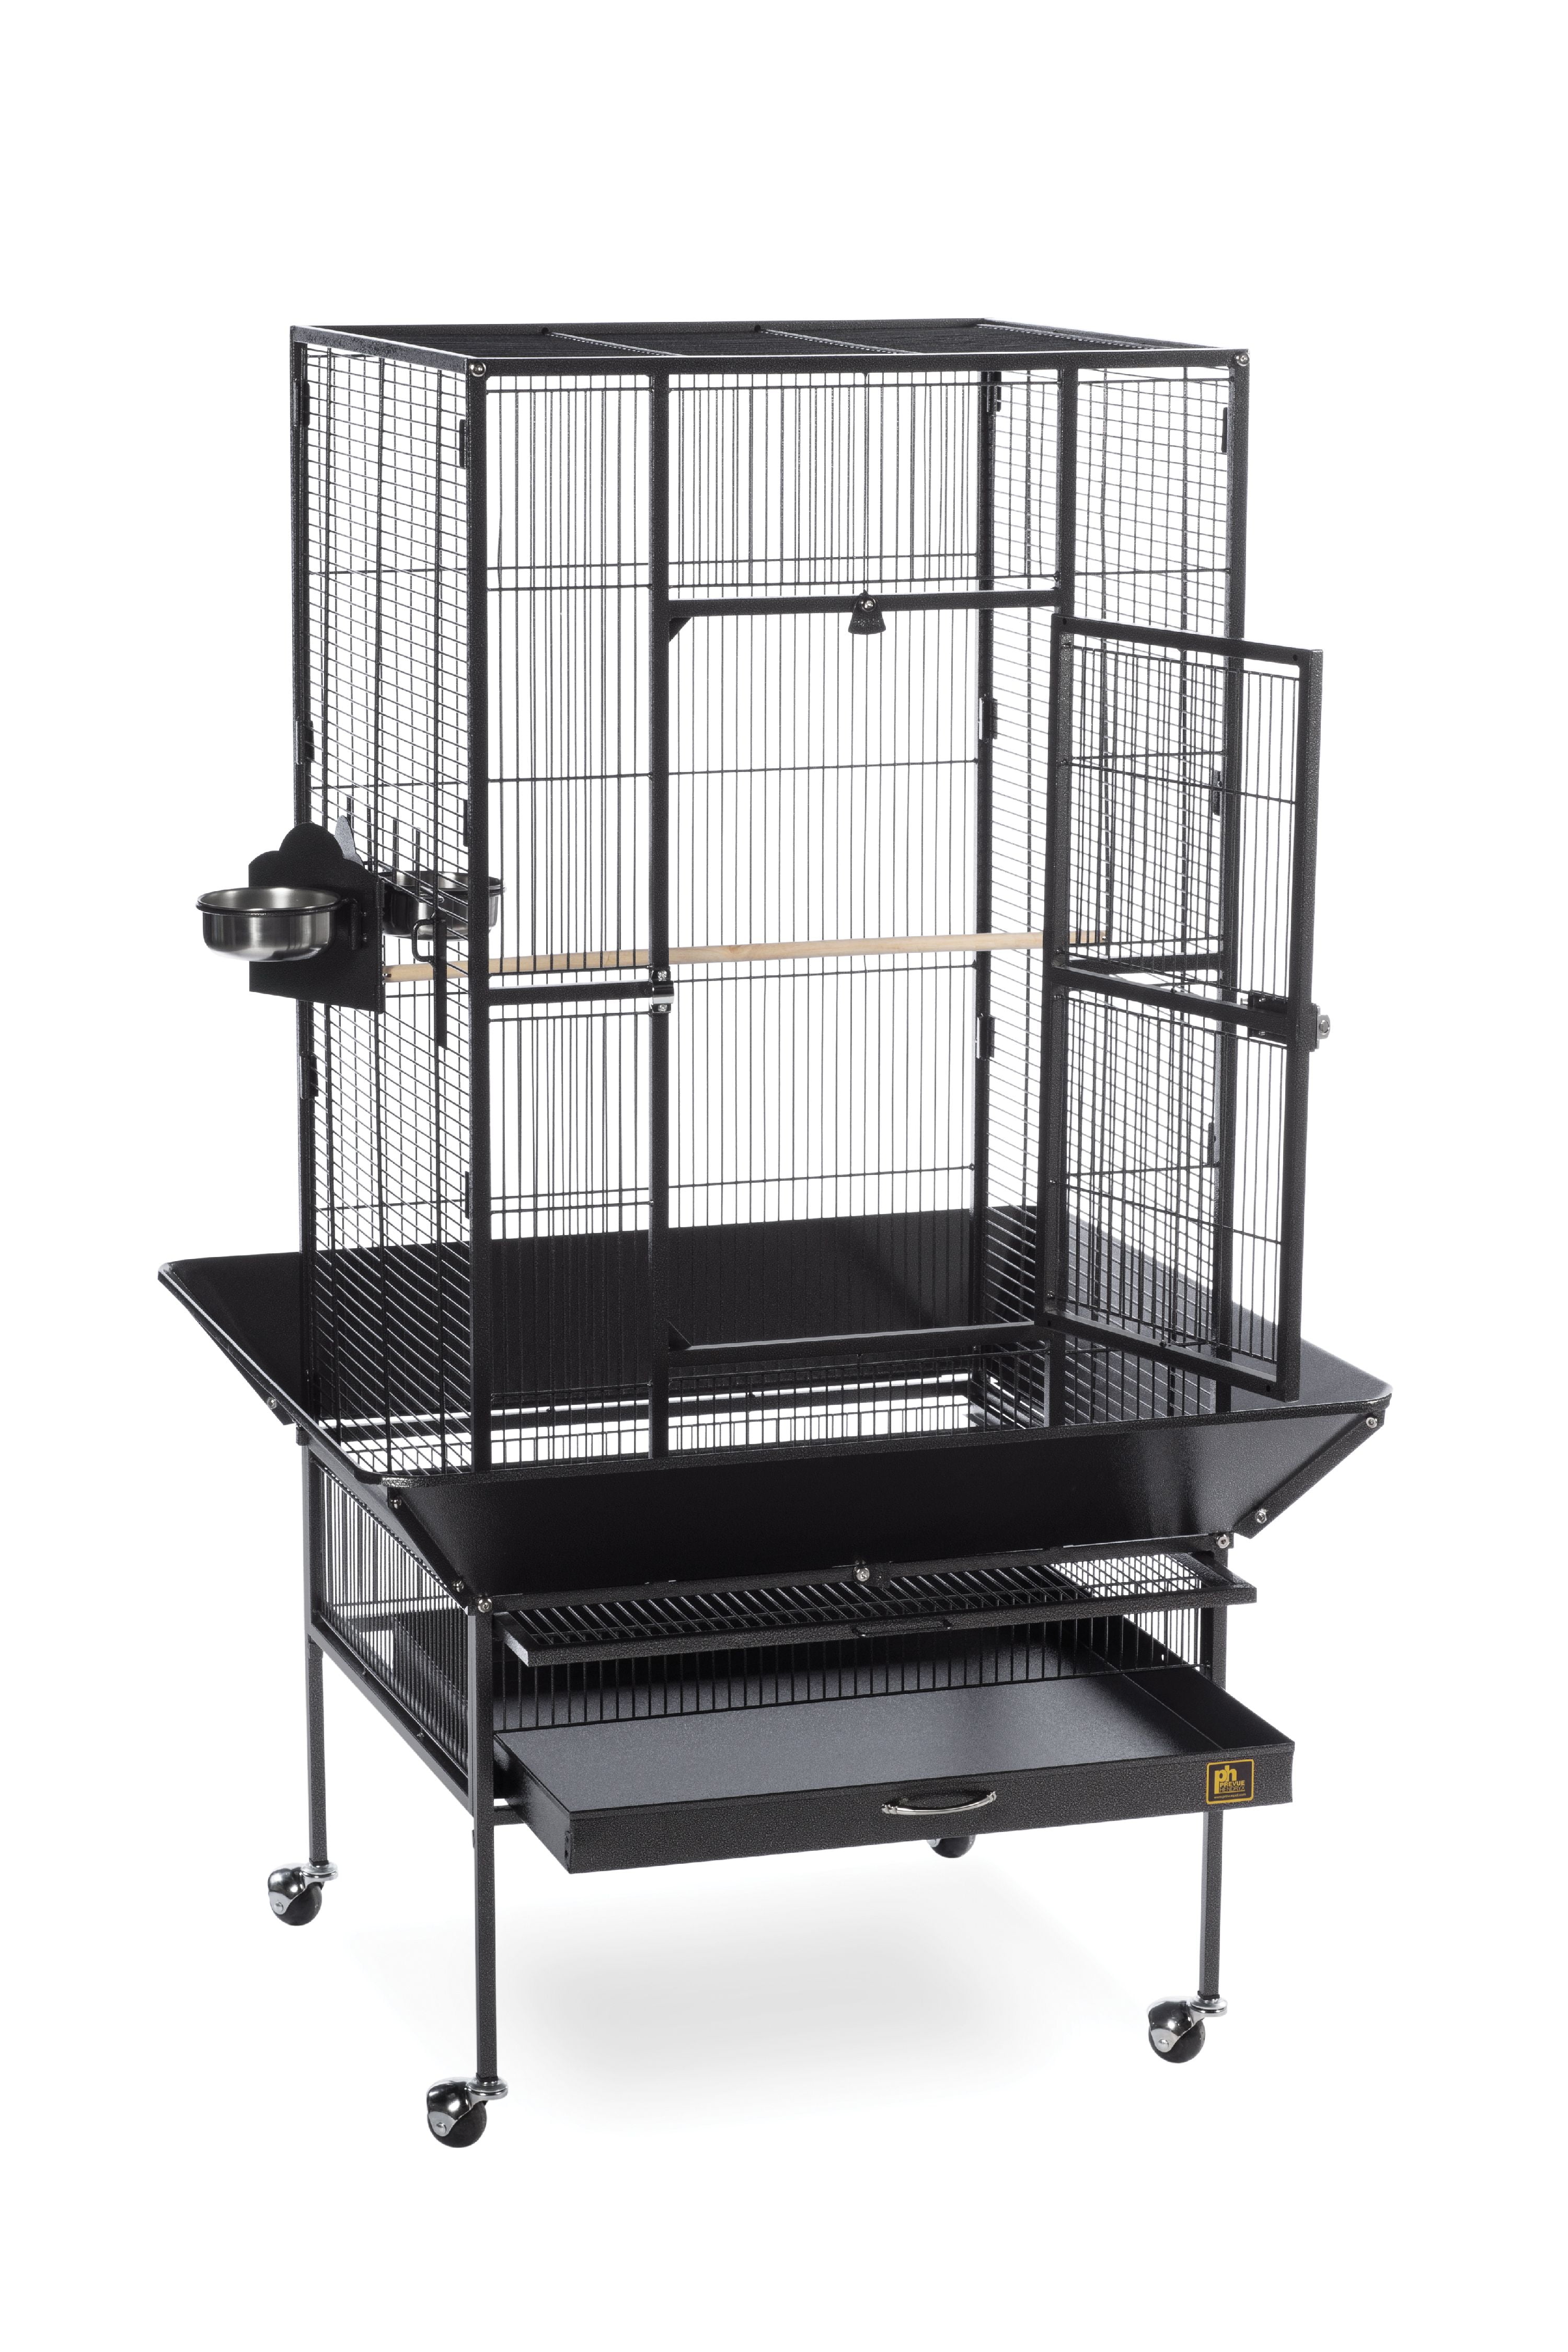  Prevue Pet Products Empire Bird Cage, X-Large, Black